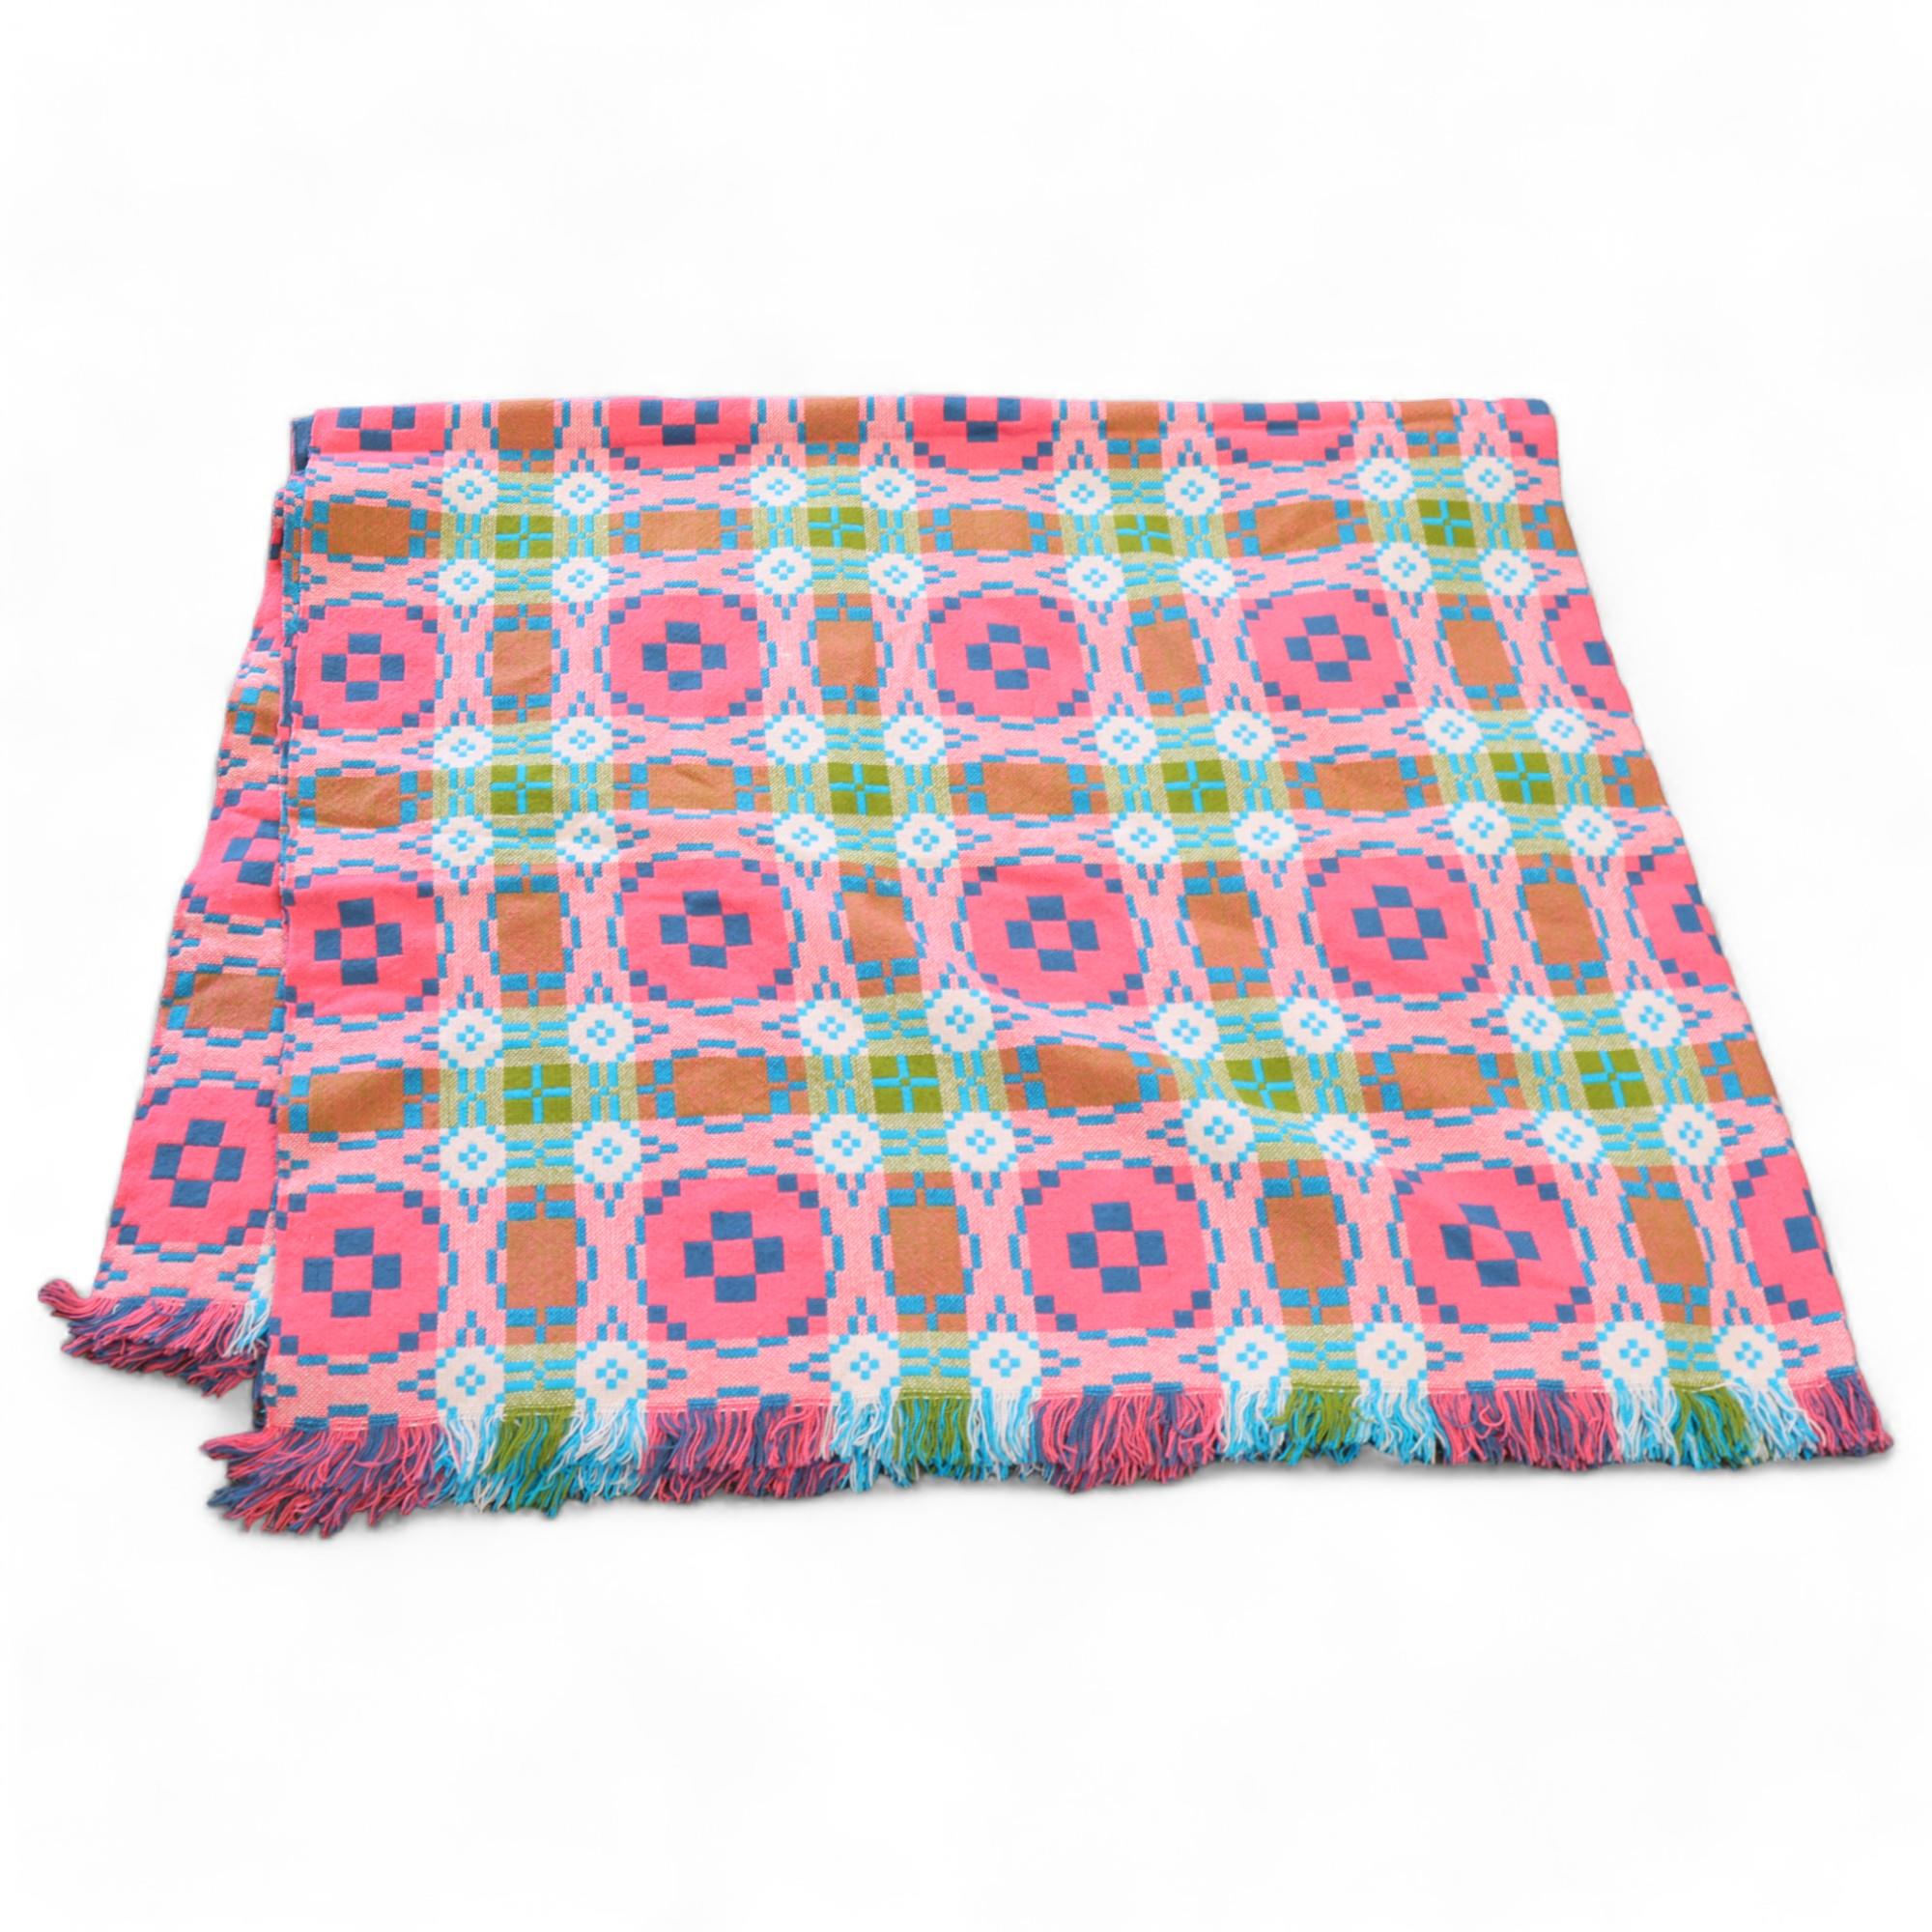 A Welsh Blanket, reversible in pink/green/blue wool, no makers label, 240 x 195cm Good condition